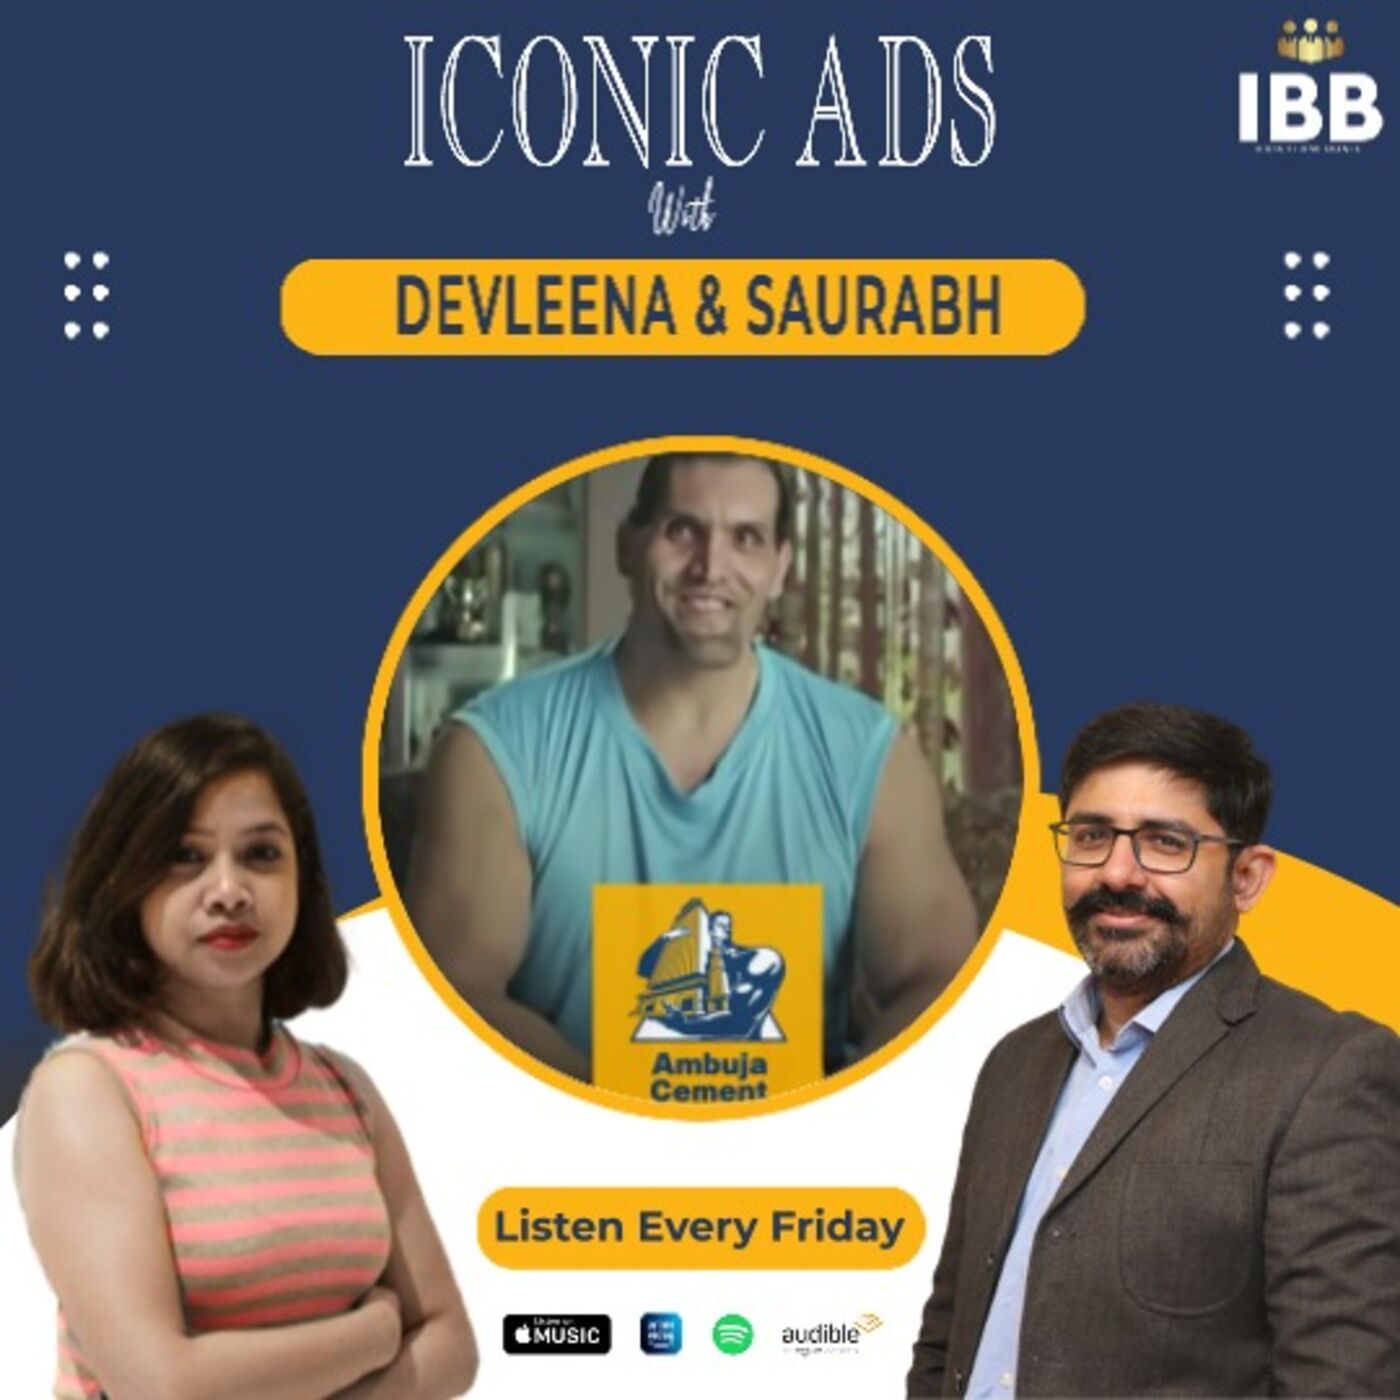 Full Episode: Iconic ads with Devleena and Saurabh Ambuja cement Ads